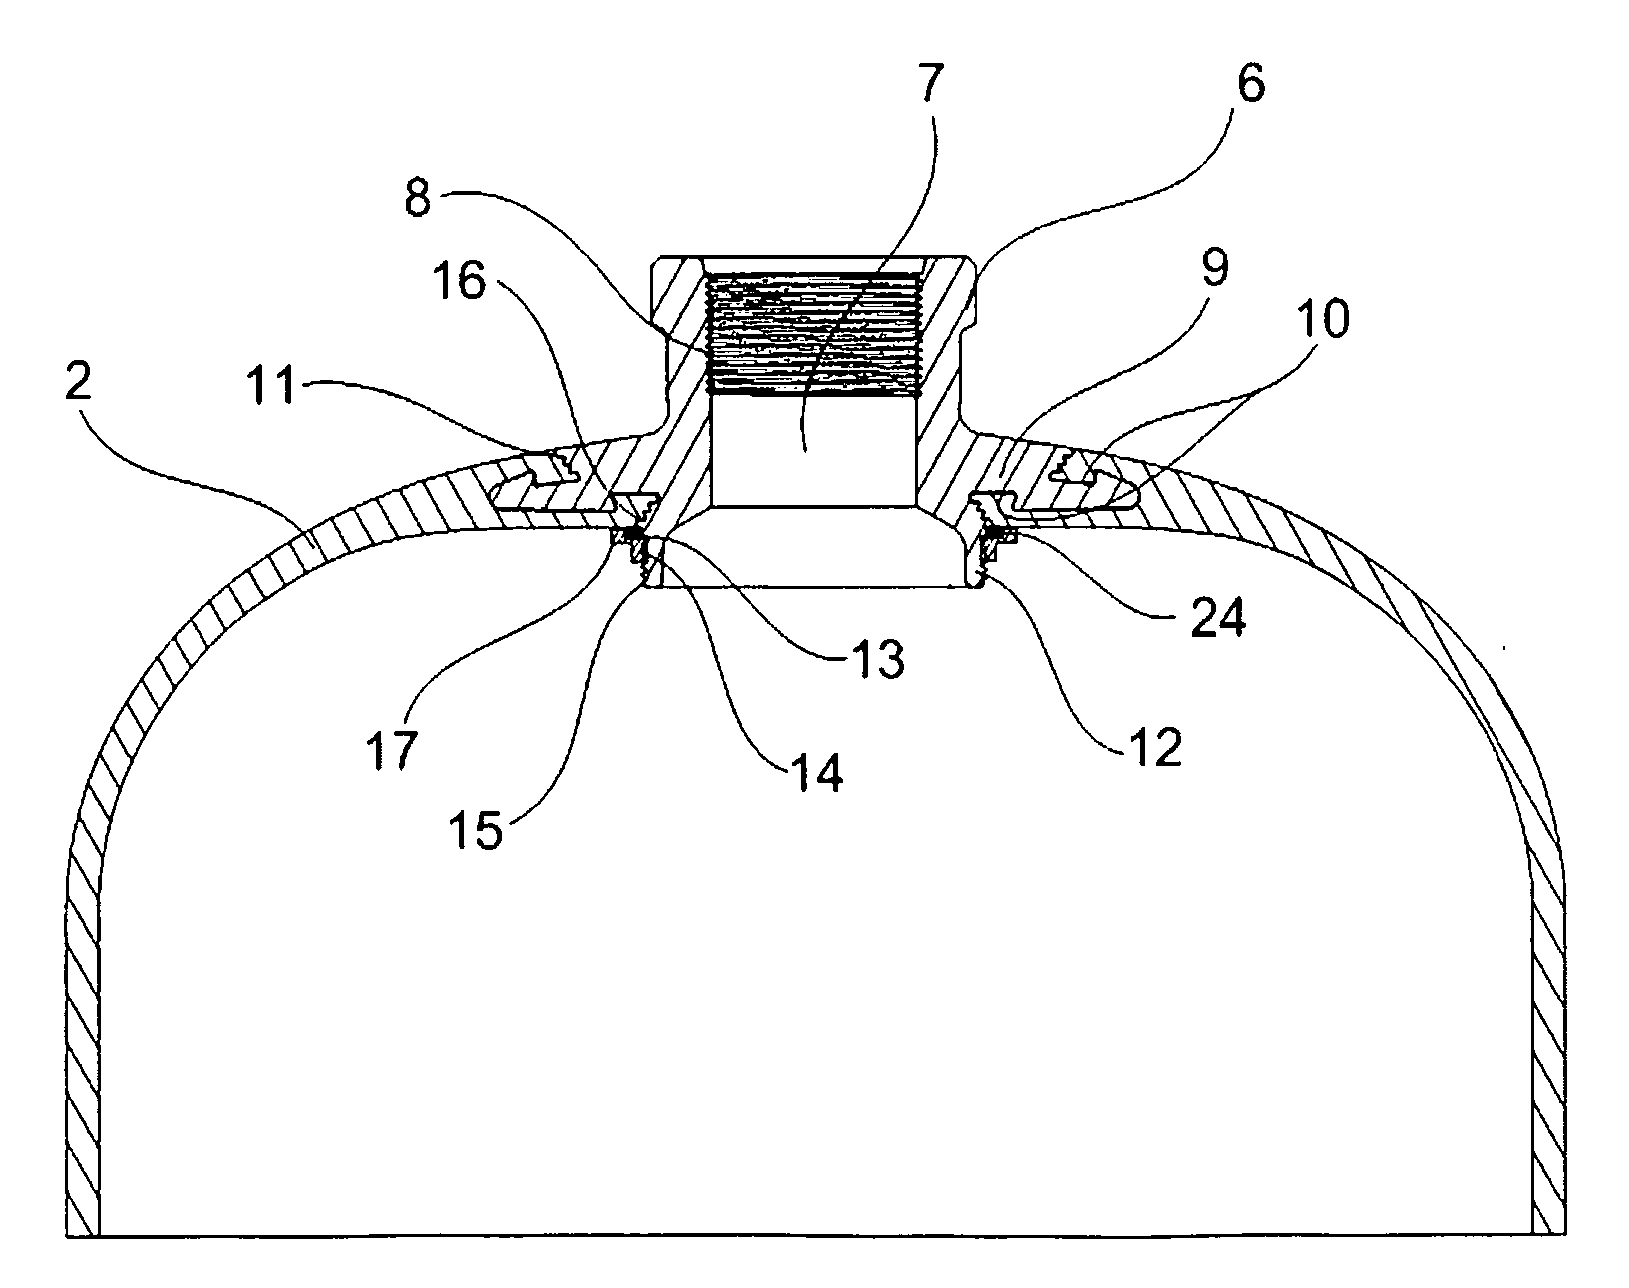 High gas-tightened metallic nozzle-boss for a high pressure composite vessel